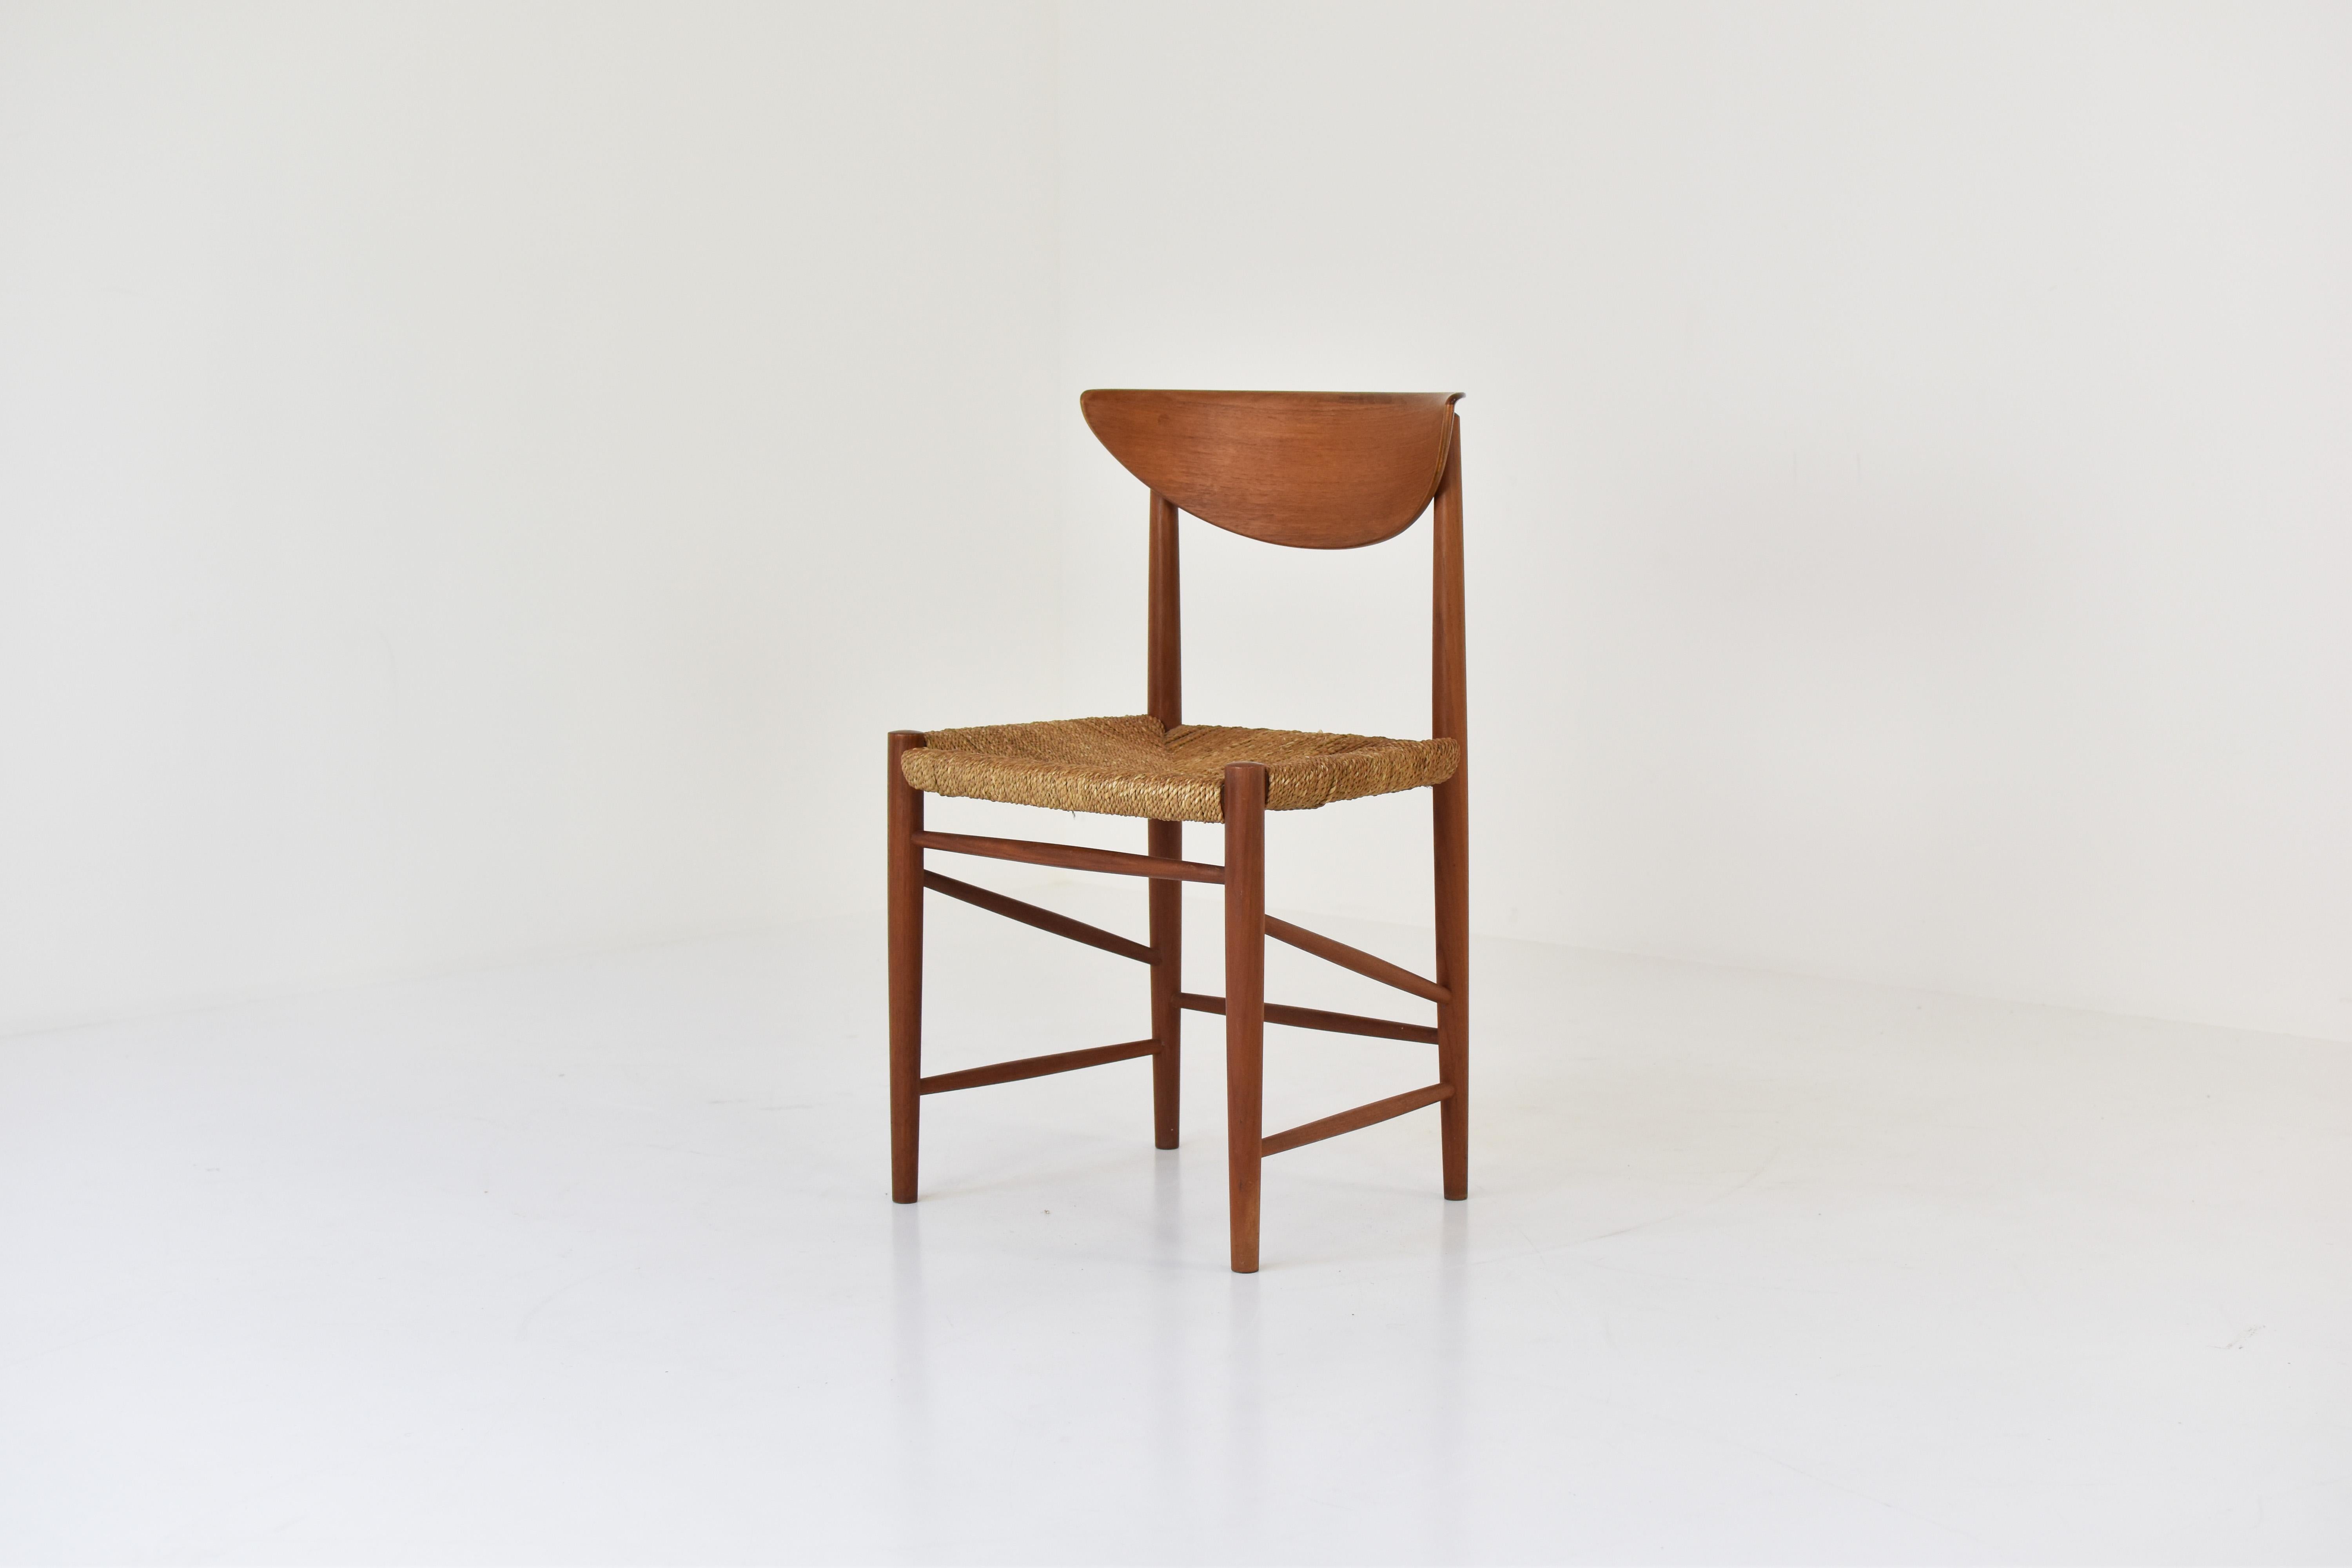 Side chair by Peter Hvidt & Orla Mølgaard-Nielsen for Søborg Møbelfabrik, Denmark 1960s. This chair, Model No. 316, is made out of teak and features the original paper cord seat. Very good and original condition.

Measurements: H 76,5 x W 46,5 x D